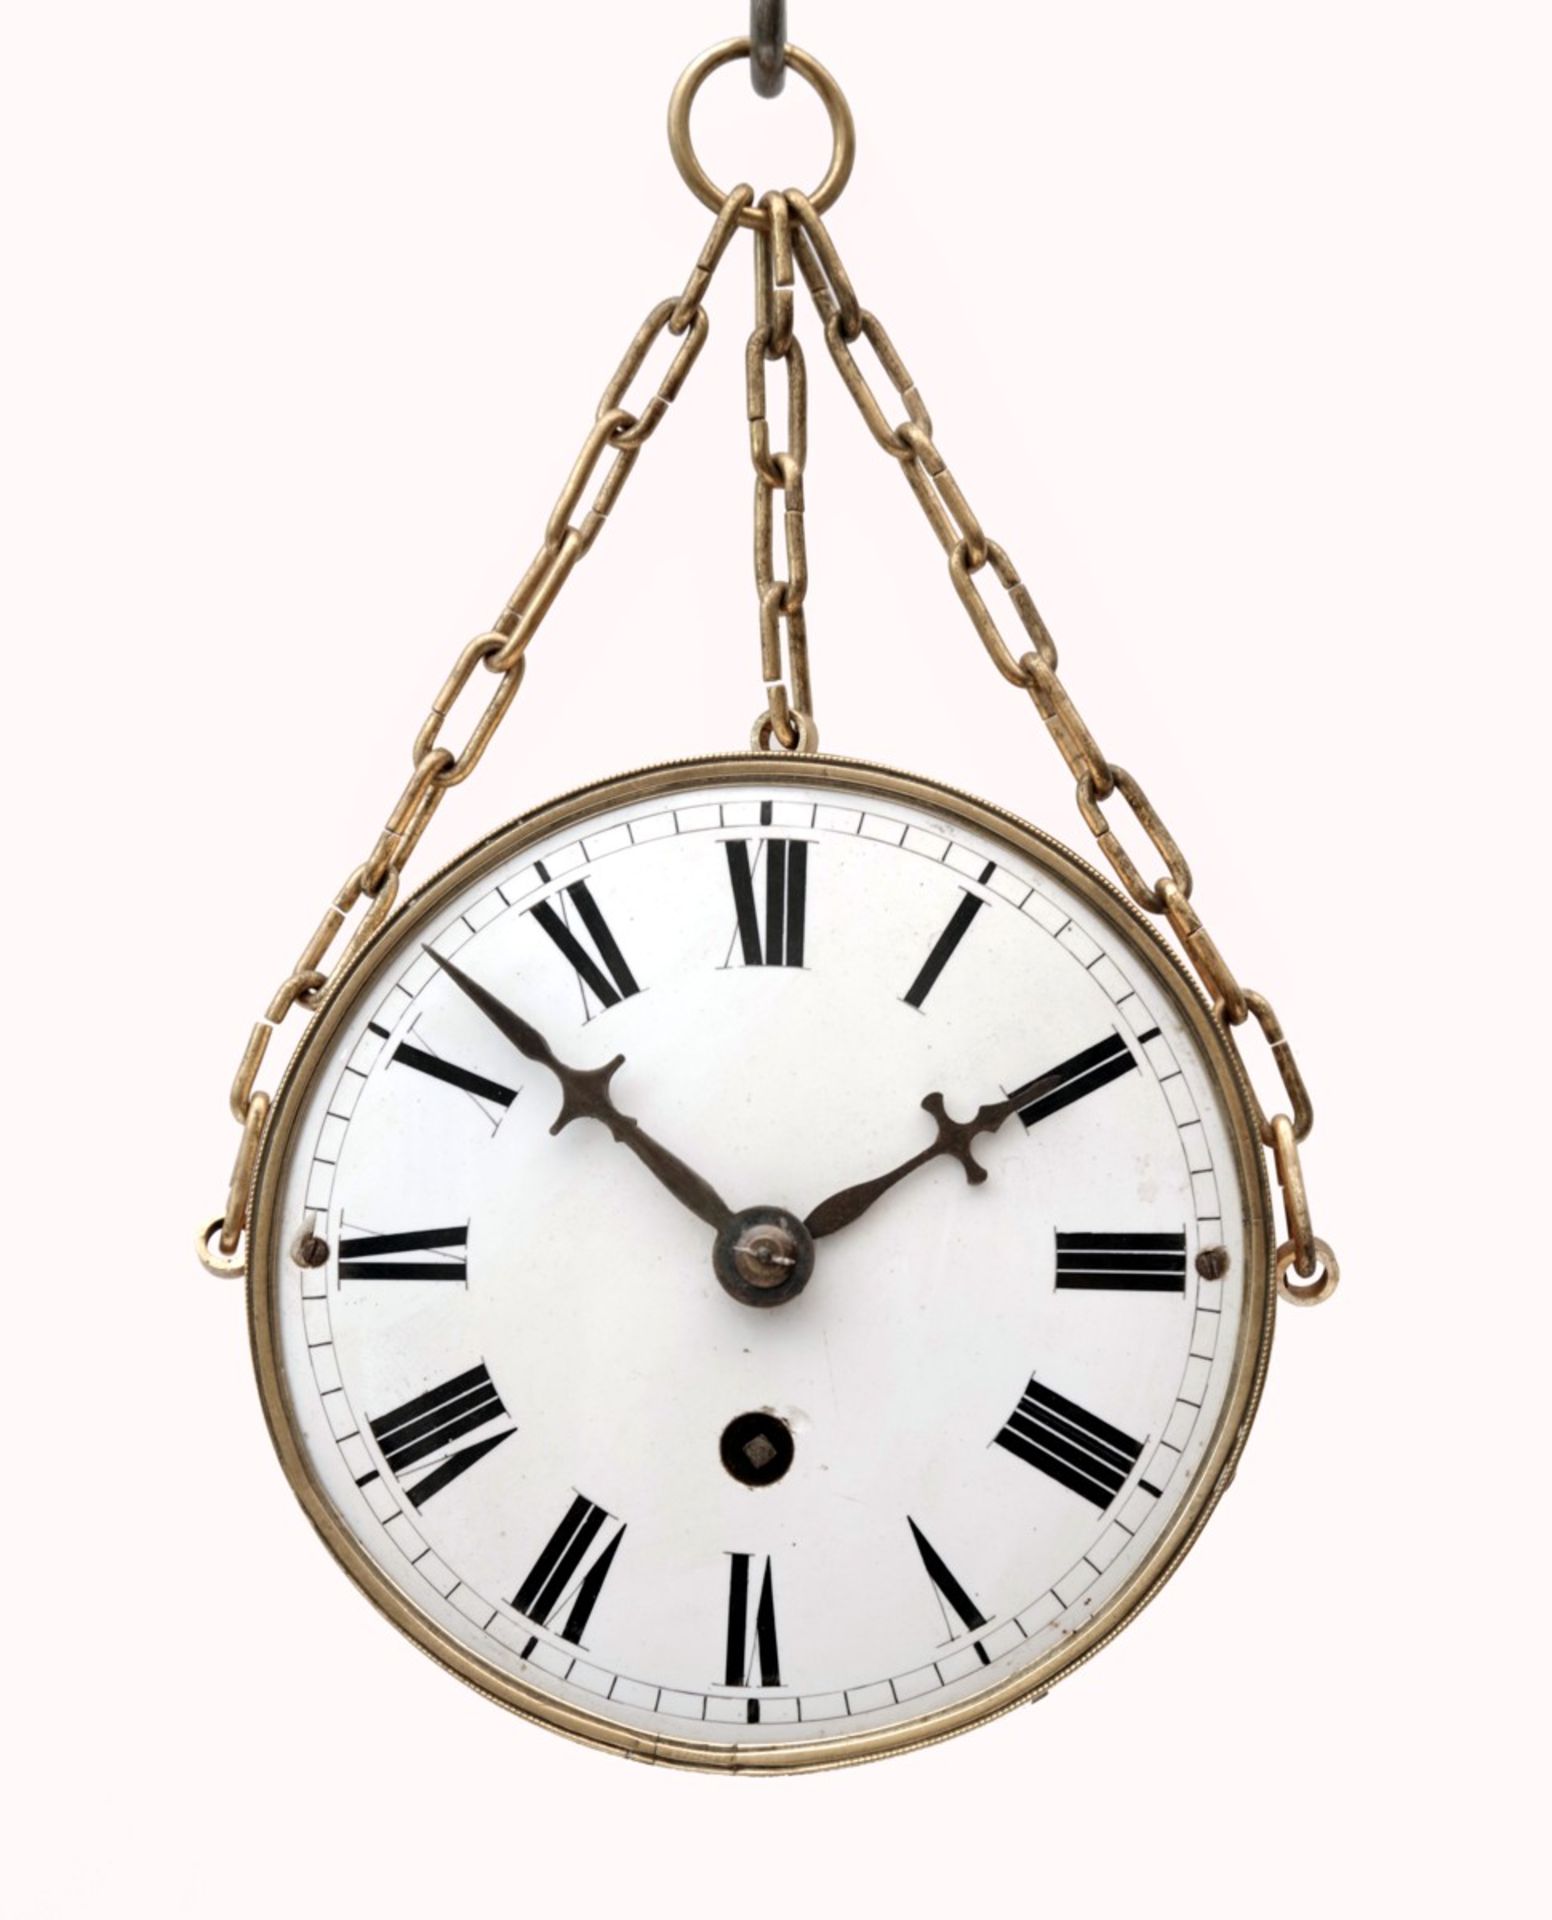 A Hanging Wall Clock With Chain